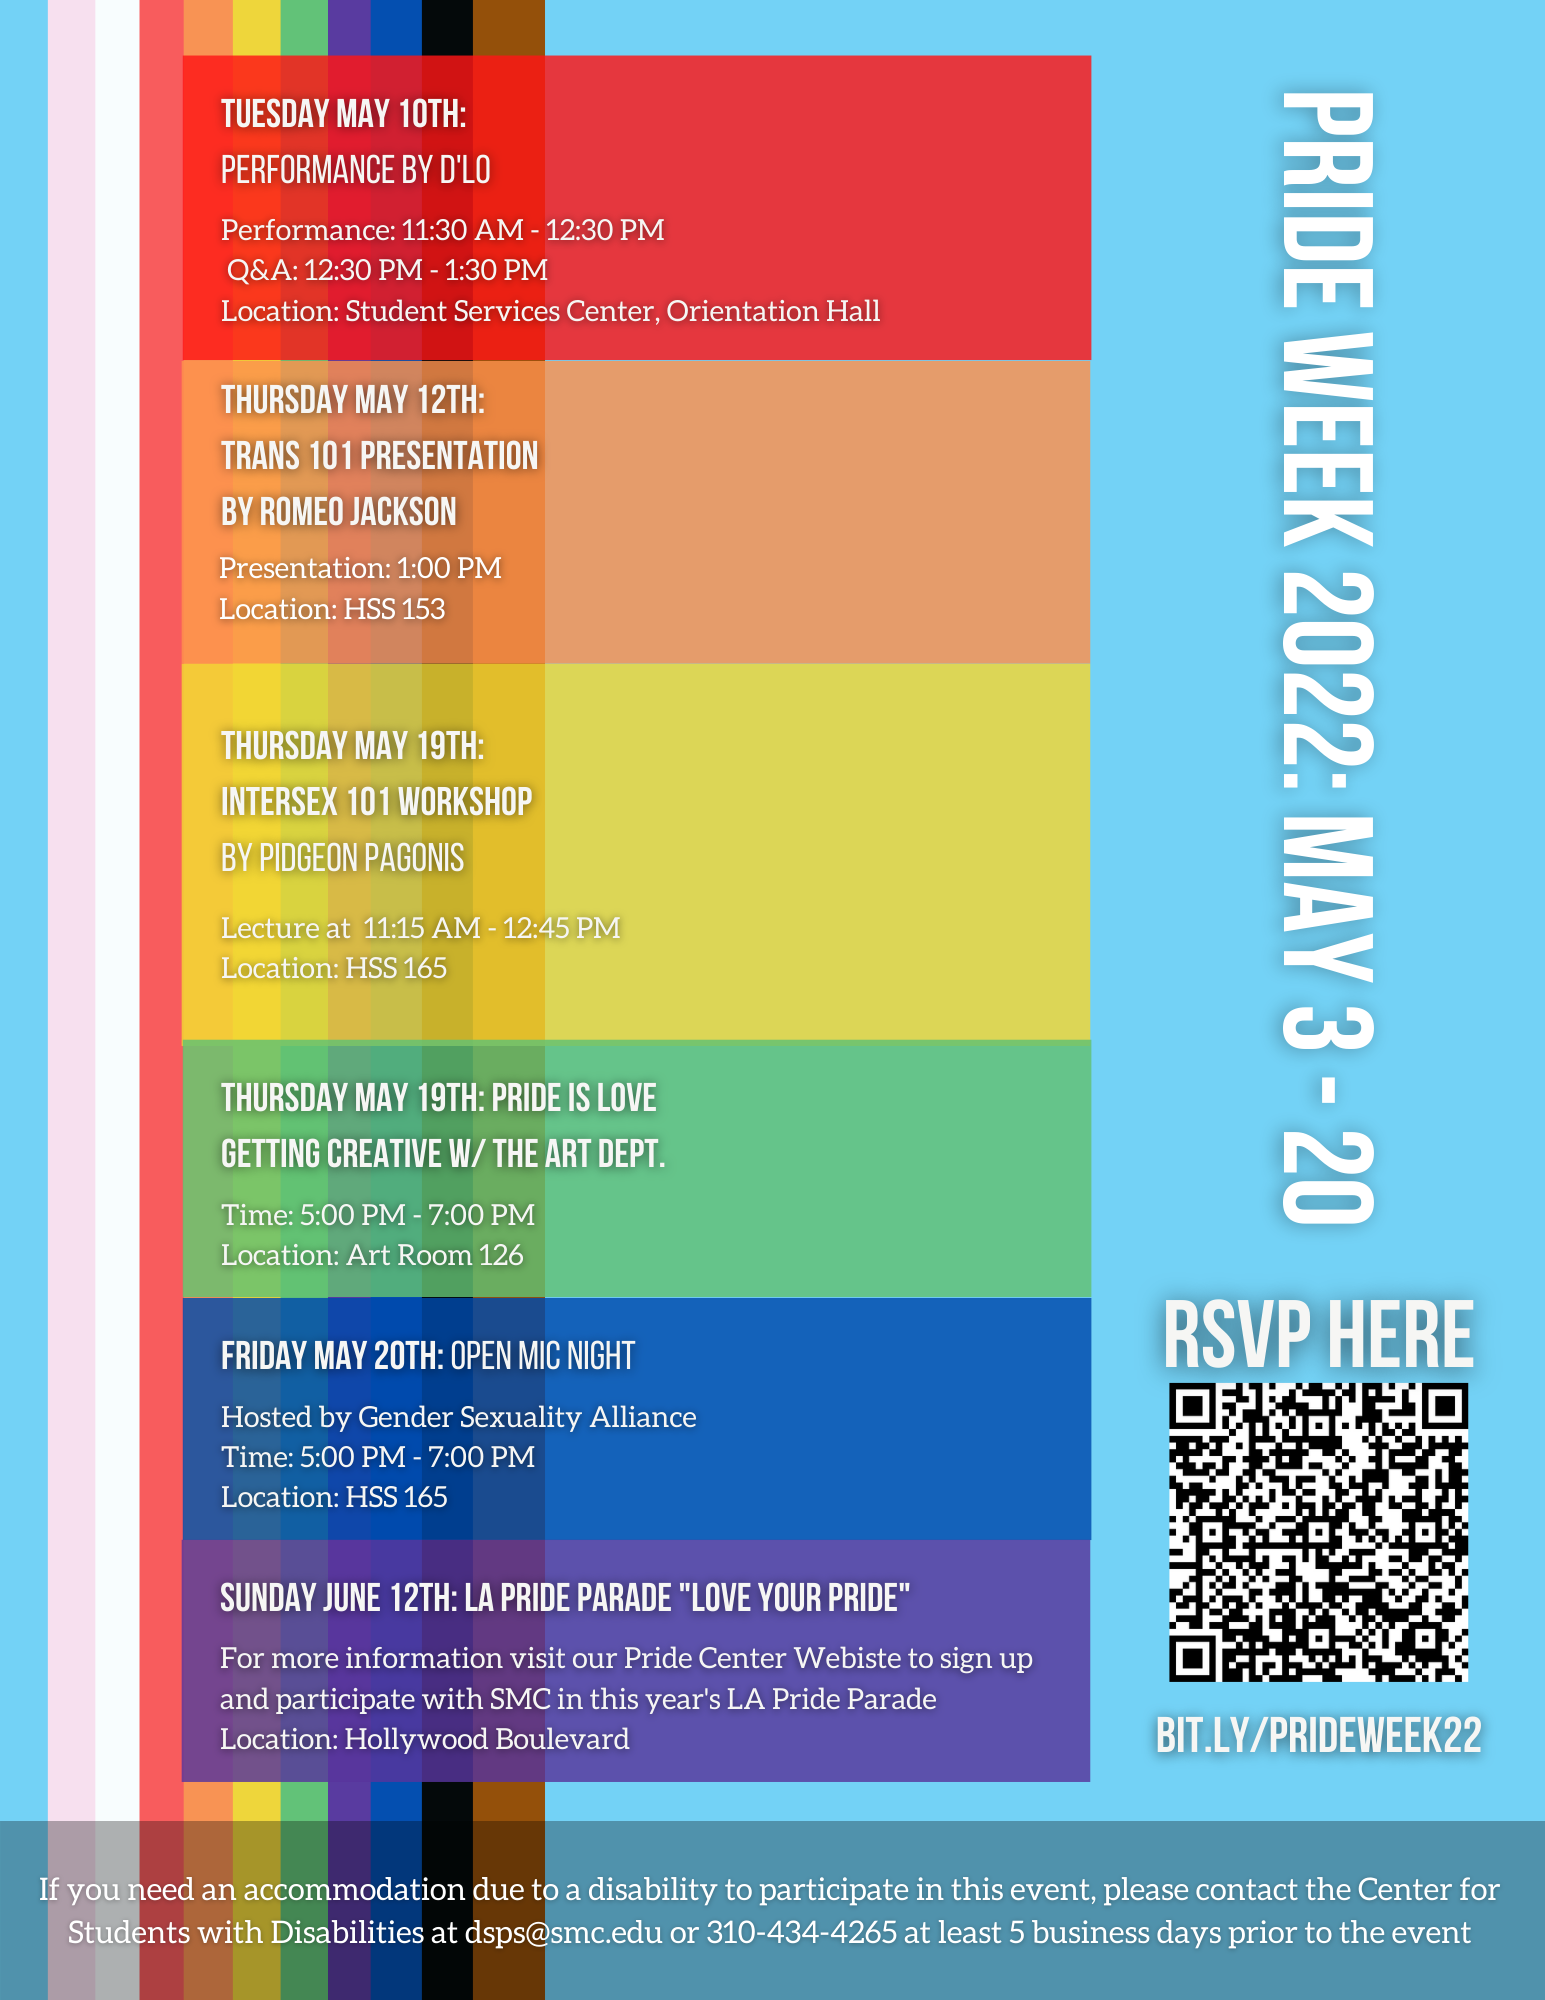 Flyer with Pride Week Event information